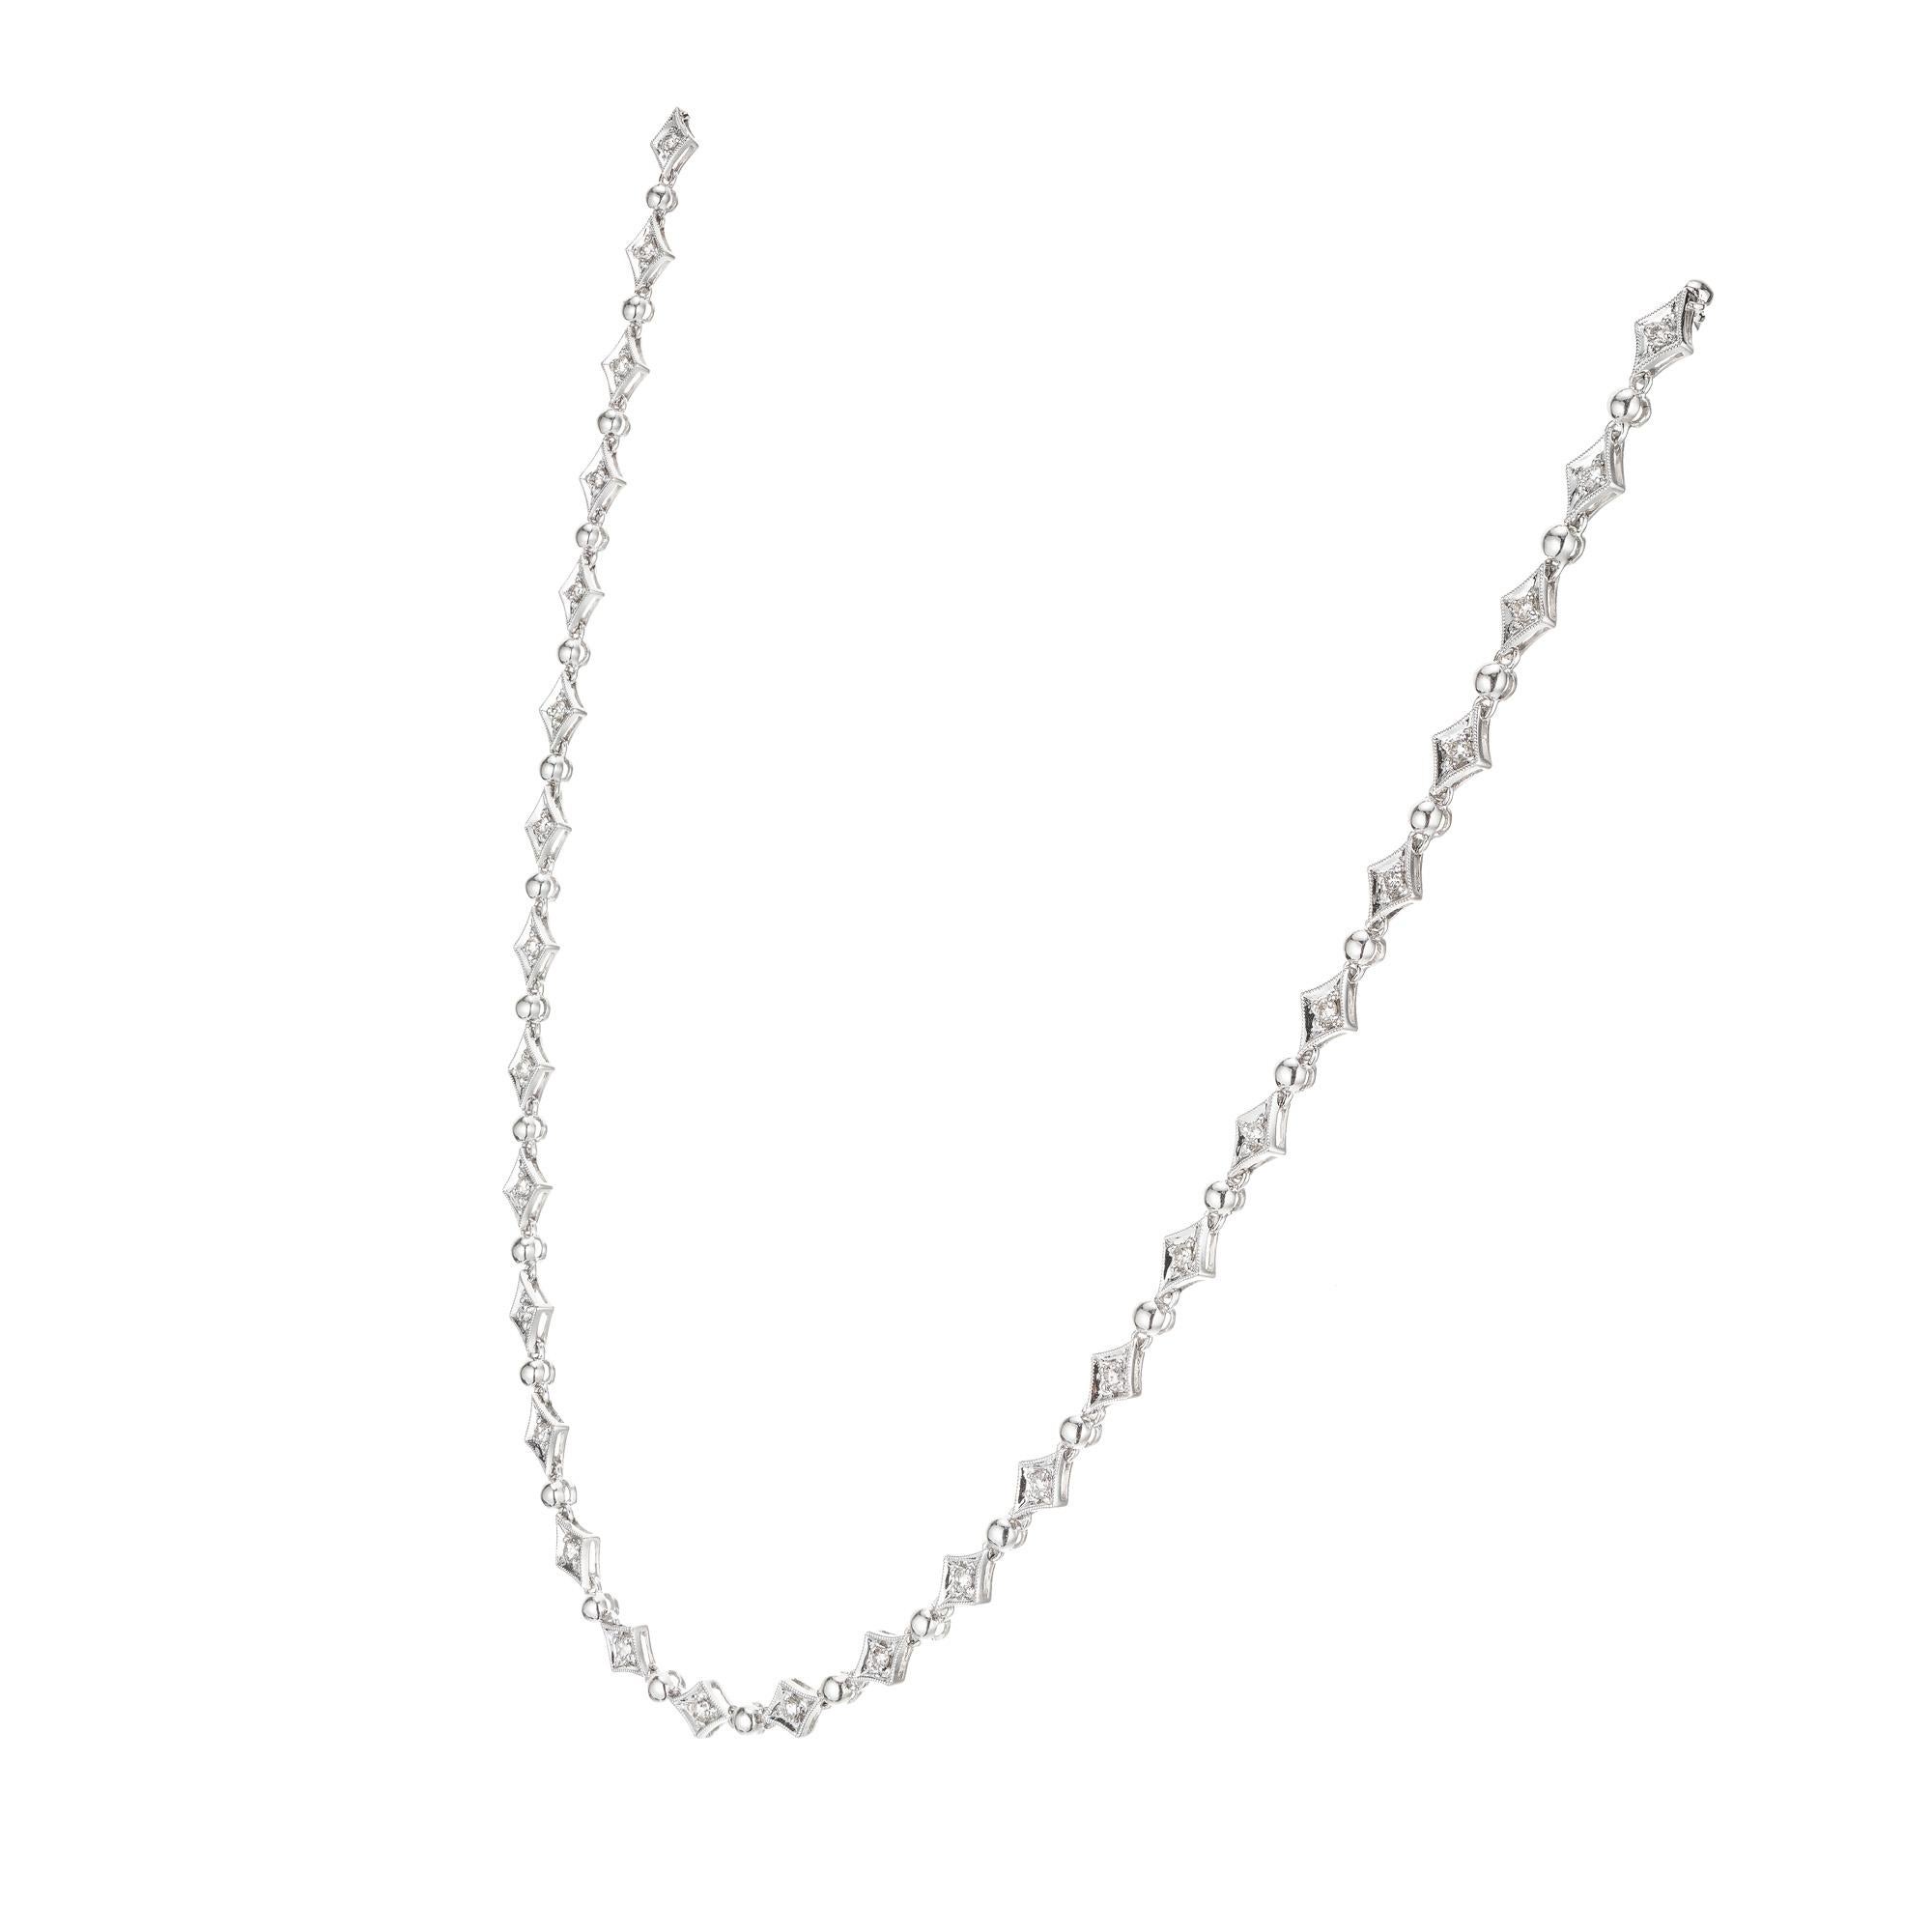 1950's Hinged Marquis Diamond link necklace. 39 full cut diamonds set in 14k white gold marquise settings. 17.5 inches.  

39 full cut diamonds, approx. total weight 1.11cts, H, VS
14k White gold
15.6 grams
Tested and stamped: 14k
Width: